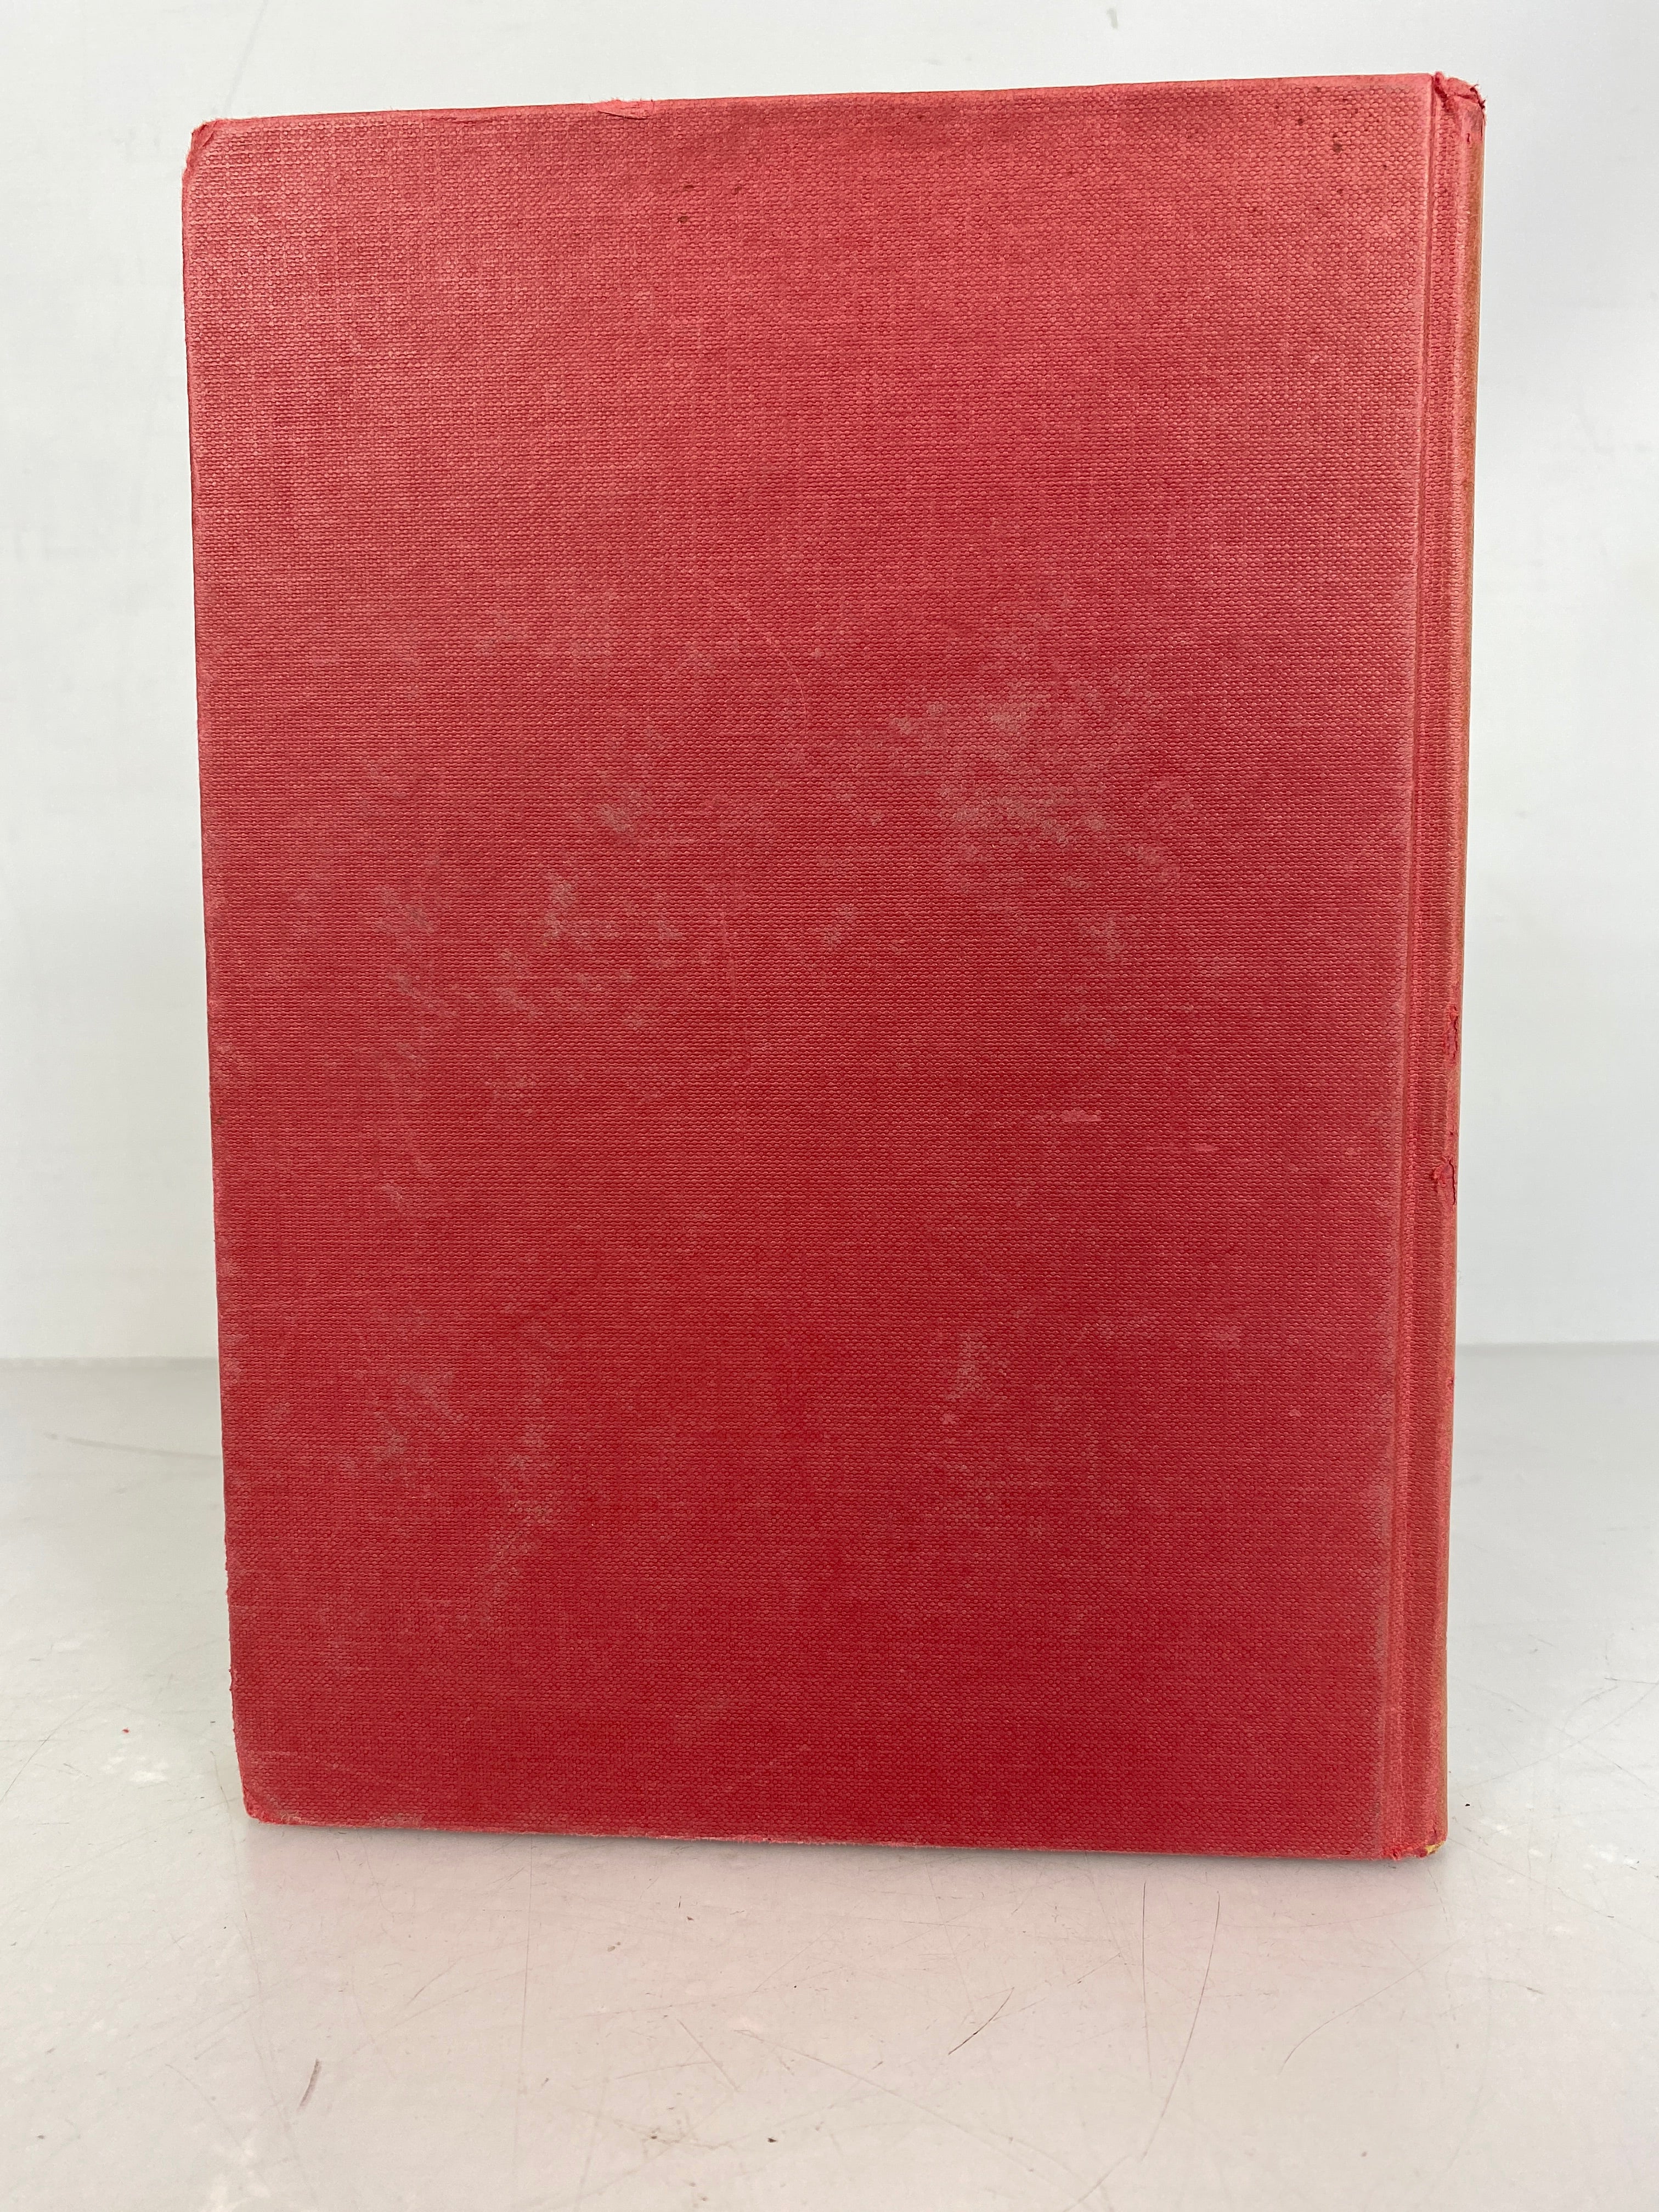 A History of the Roman People by Heichelheim and Yeo 1962 HC